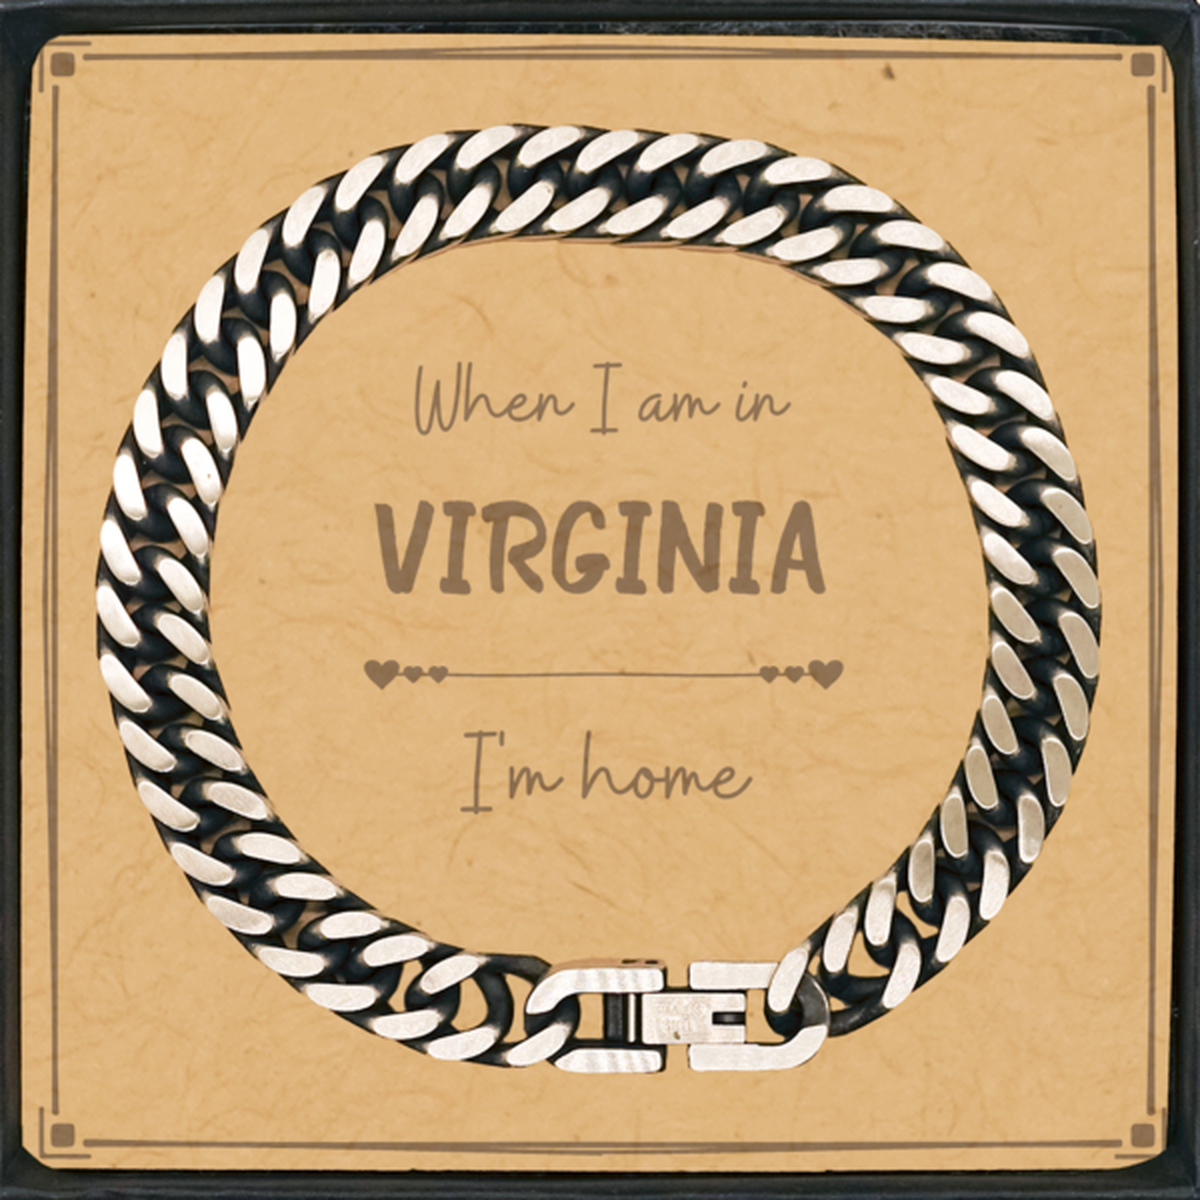 When I am in Virginia I'm home Cuban Link Chain Bracelet, Message Card Gifts For Virginia, State Virginia Birthday Gifts for Friends Coworker